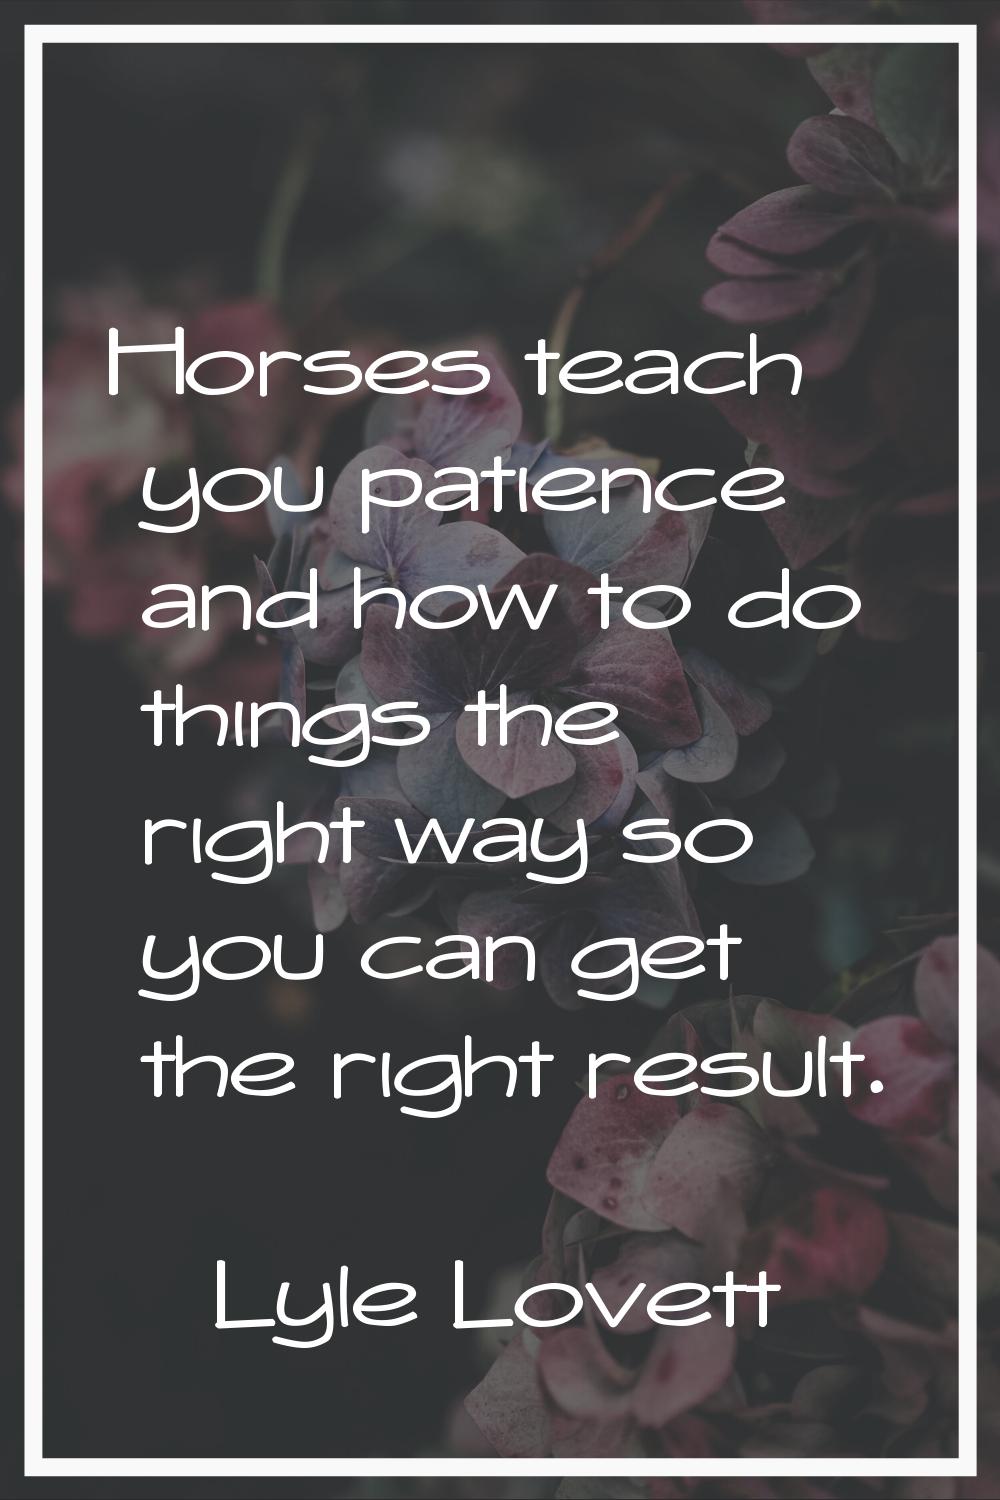 Horses teach you patience and how to do things the right way so you can get the right result.